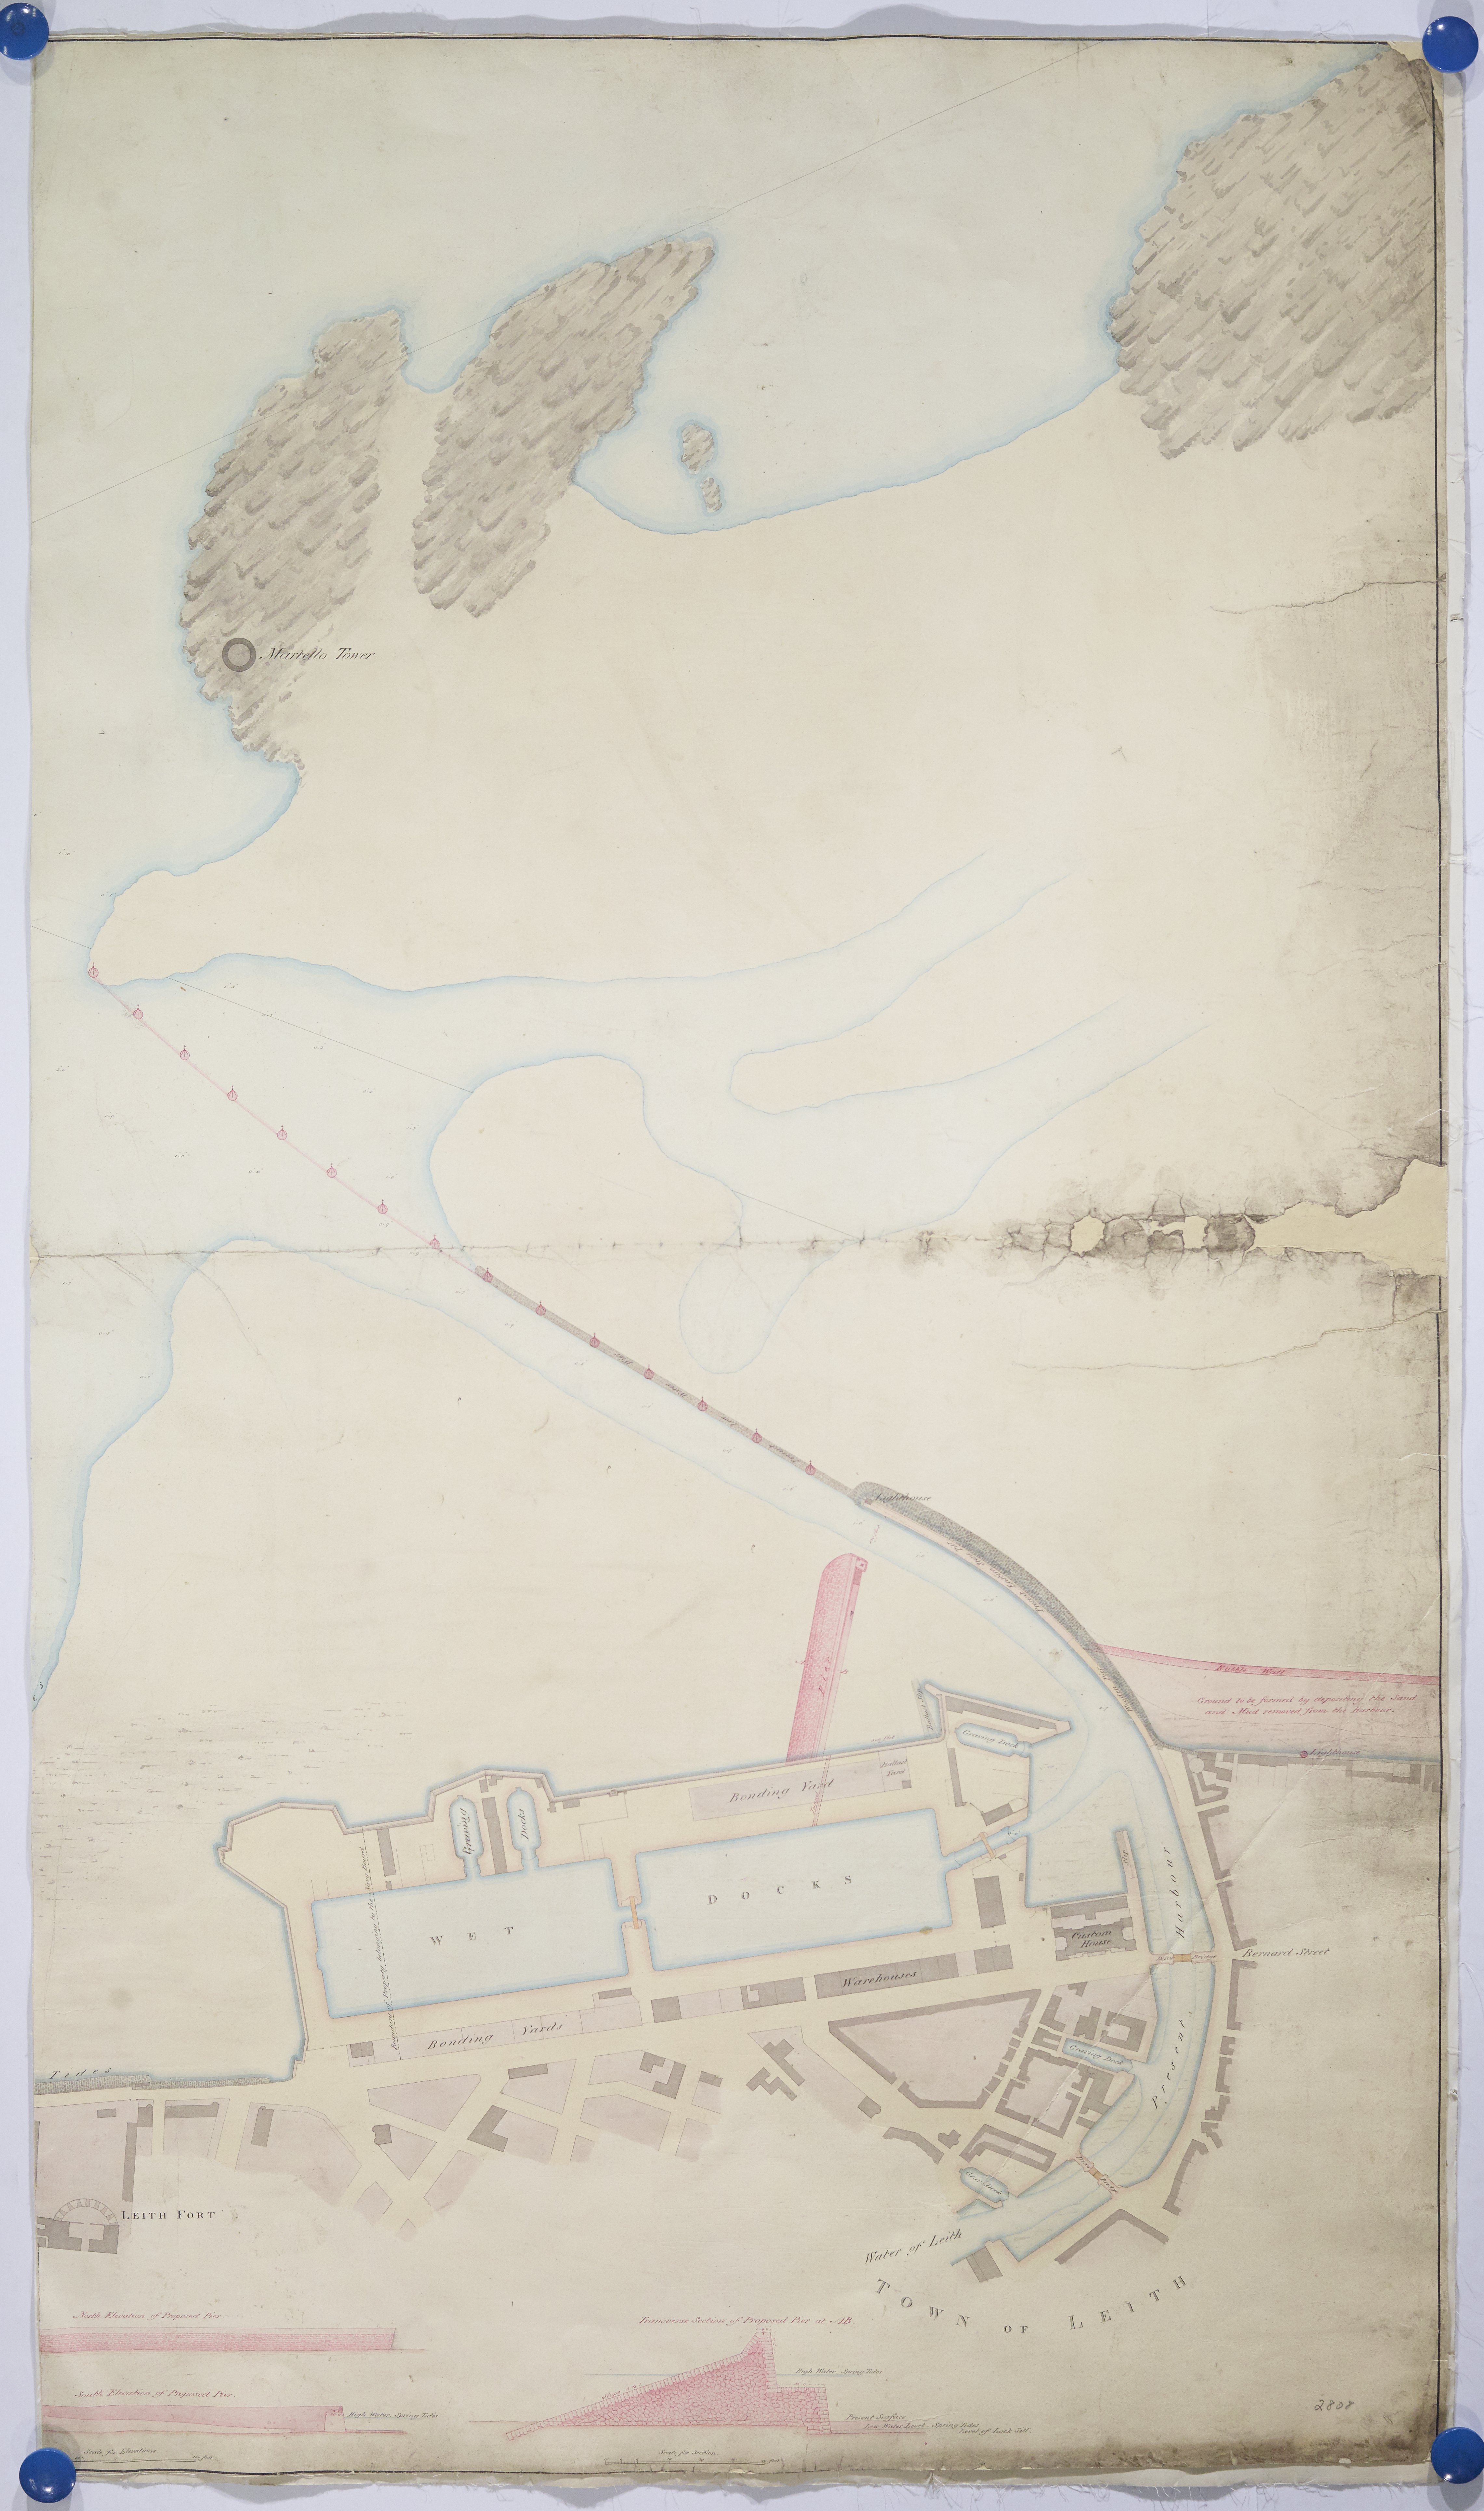 Plan of the harbour of Leith "in its present state showing the proposed pier and other improvements": Crown copyright. National Records of Scotland, RHP2808